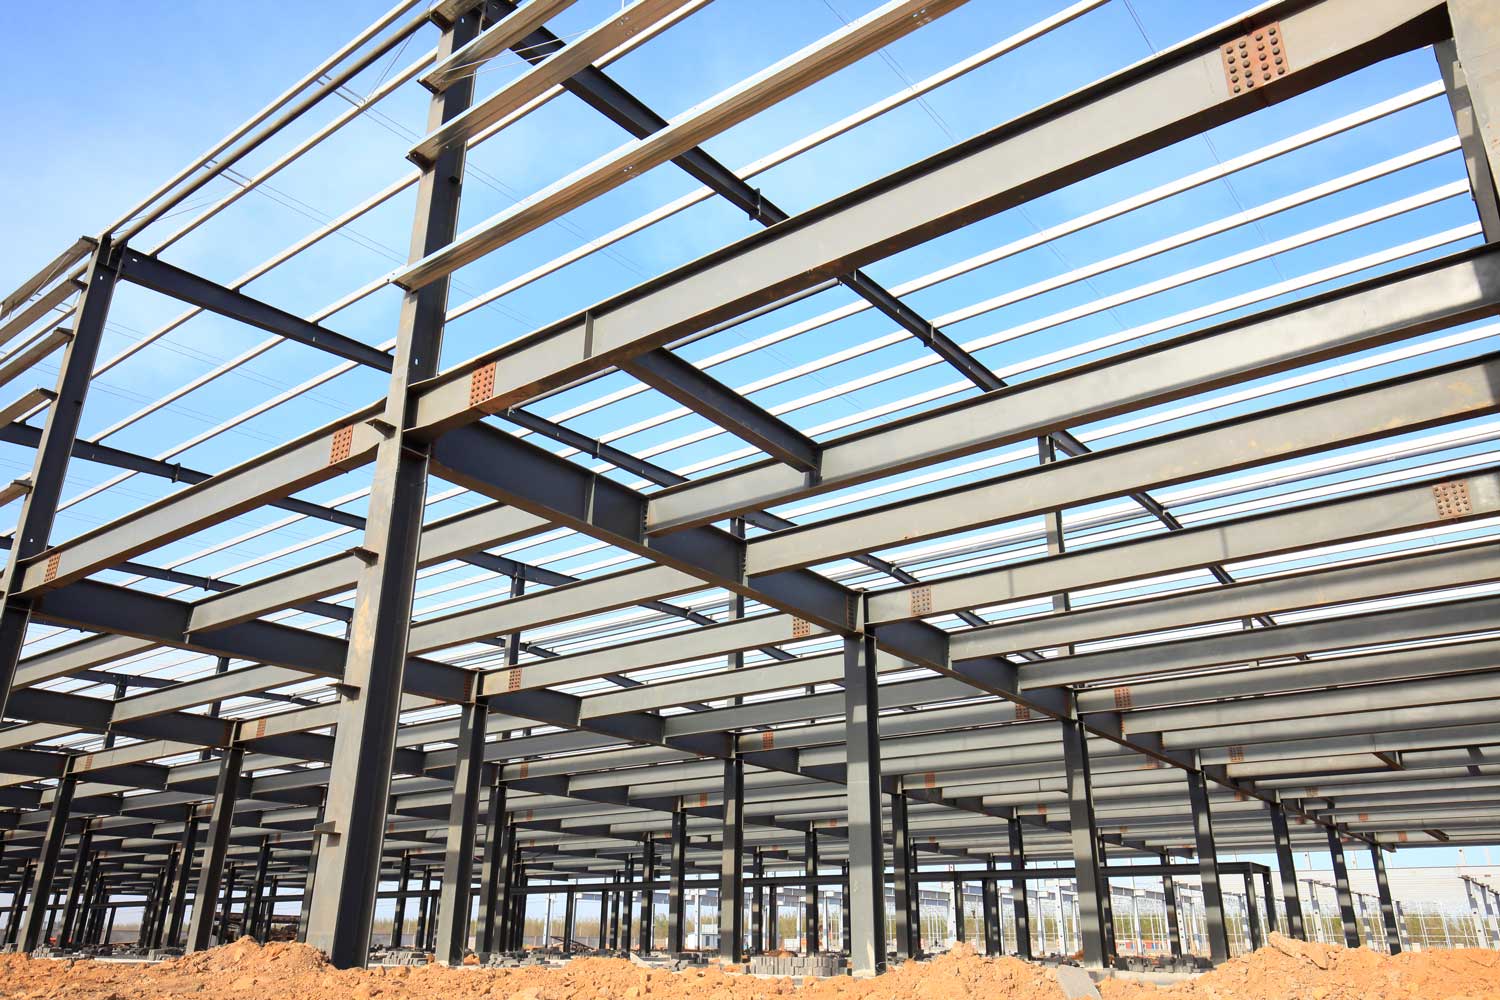 Commercial Steelwork - Hewaswater Engineering South West - Steel Fabrication, Metalwork Services and Steel Processing